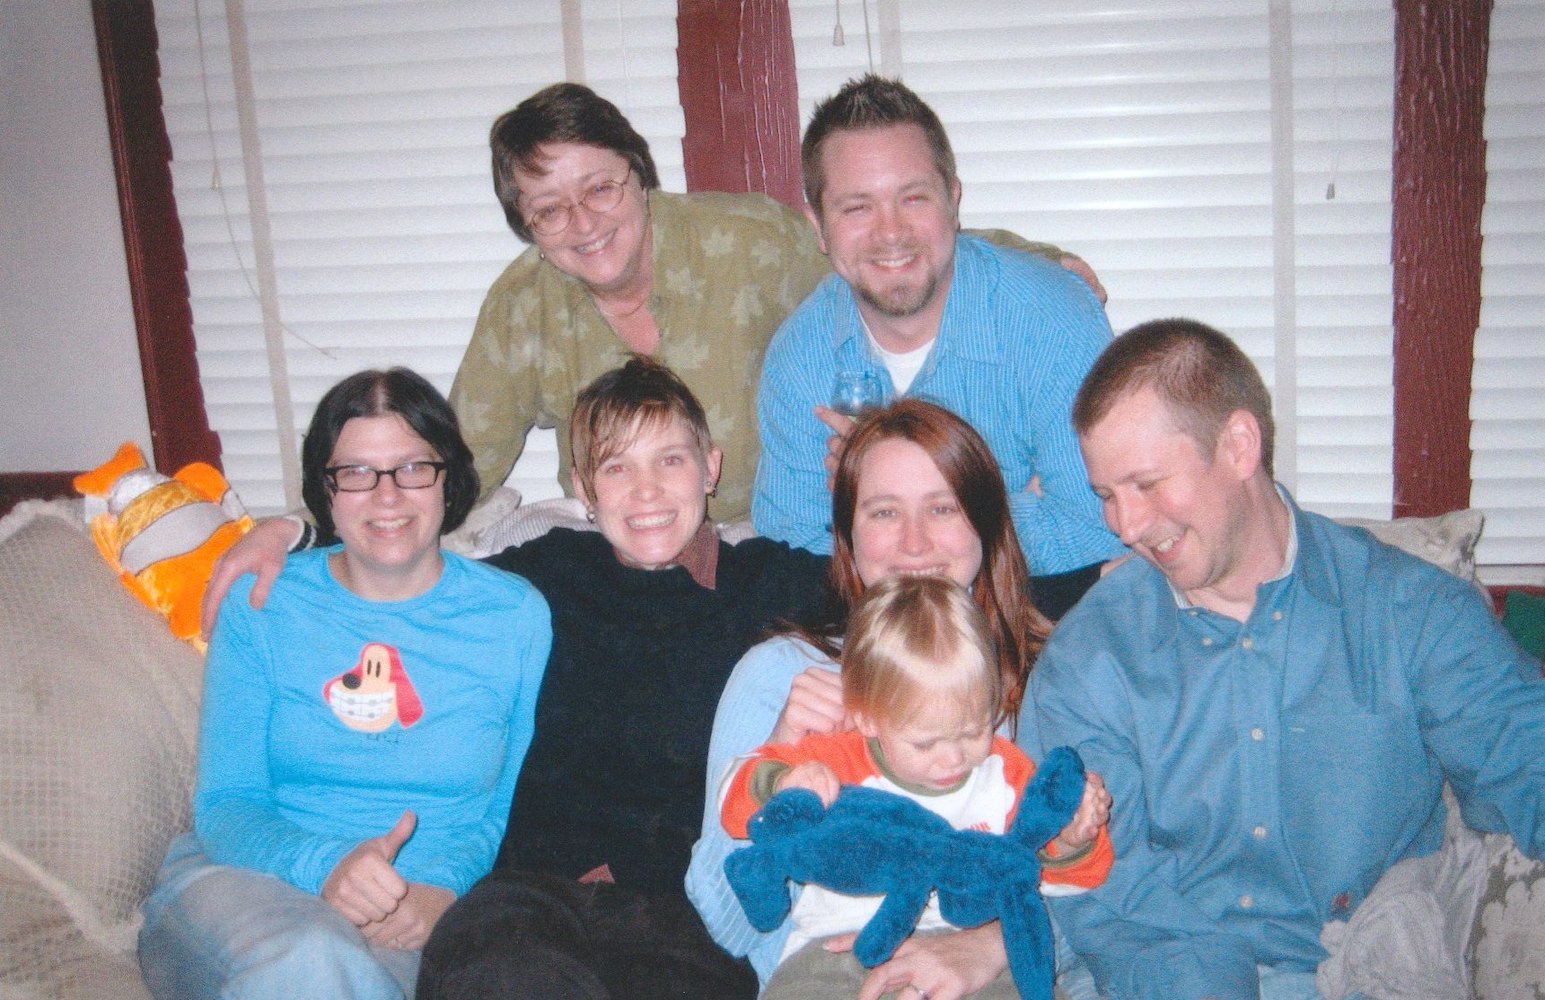 Katie Hiers with the Bark Family, 2005. The top row includes Kathie Hiers and Dave Bark (Donna McGahre Bark’s son). The bottom row includes Amy Patt (Dave Bark’s fiancee), S.B. Brown (Dave & Amy’s stepsister), Amy Bark (Donna McGahre Bark’s daughter) holding Kyle Nicholas (her son), and Edward Nicholas (Amy’s partner). Photo courtesy of Kathie Hiers. 